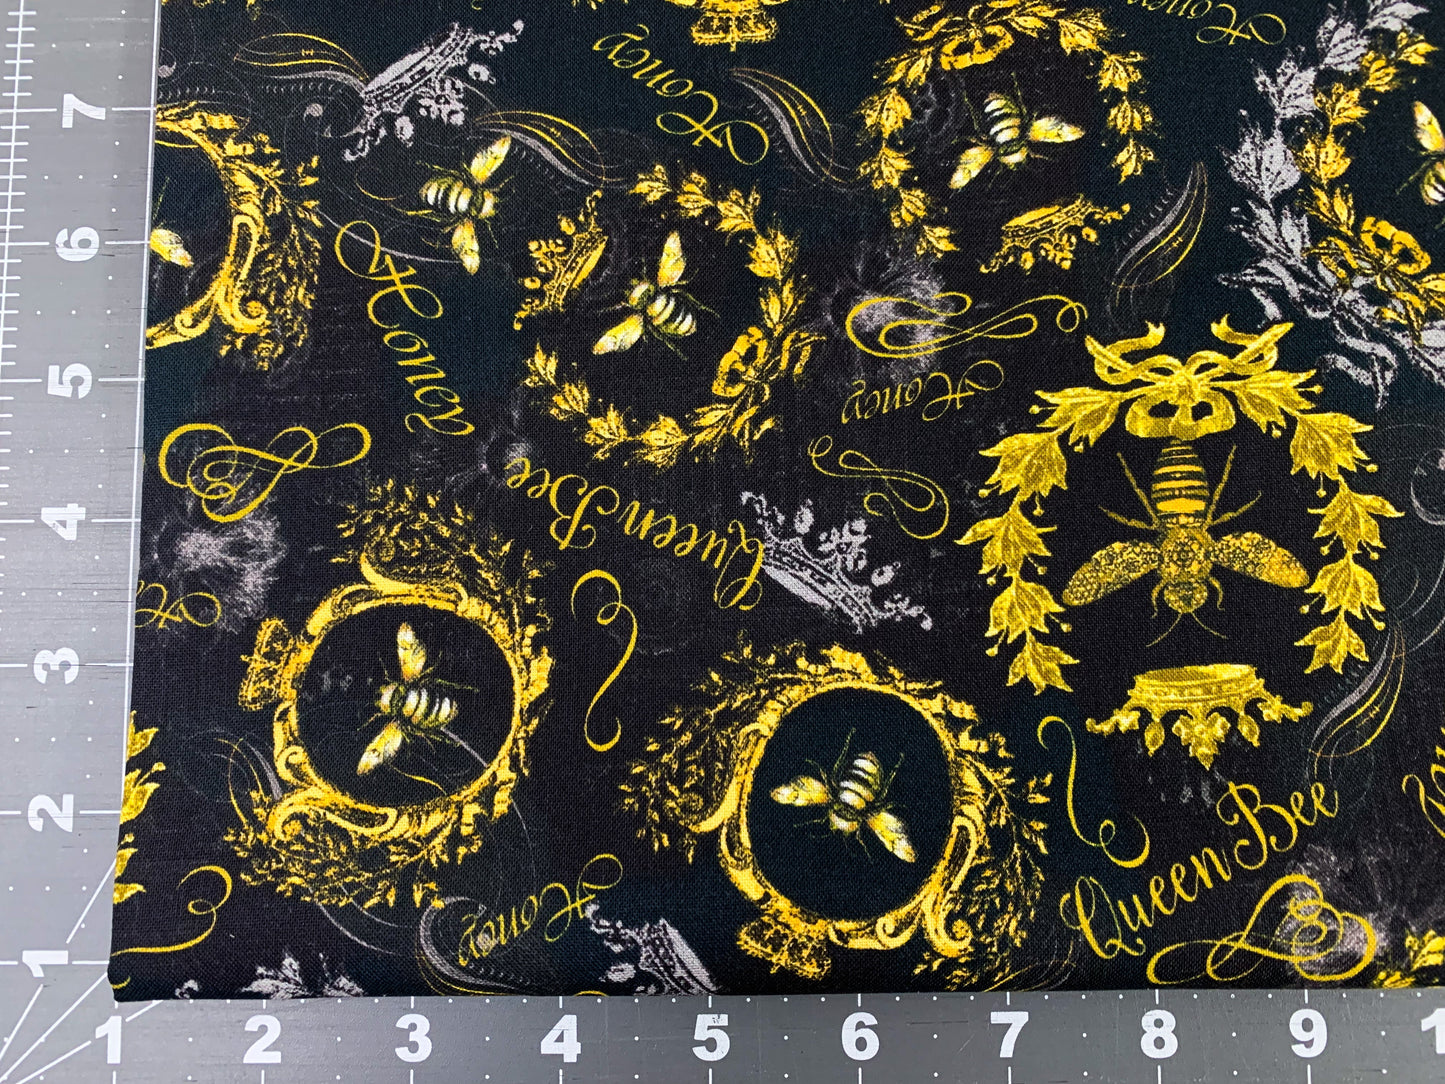 Crest Fancy Queen Bee fabric CD1355 Bumble bee fabric floral fabric